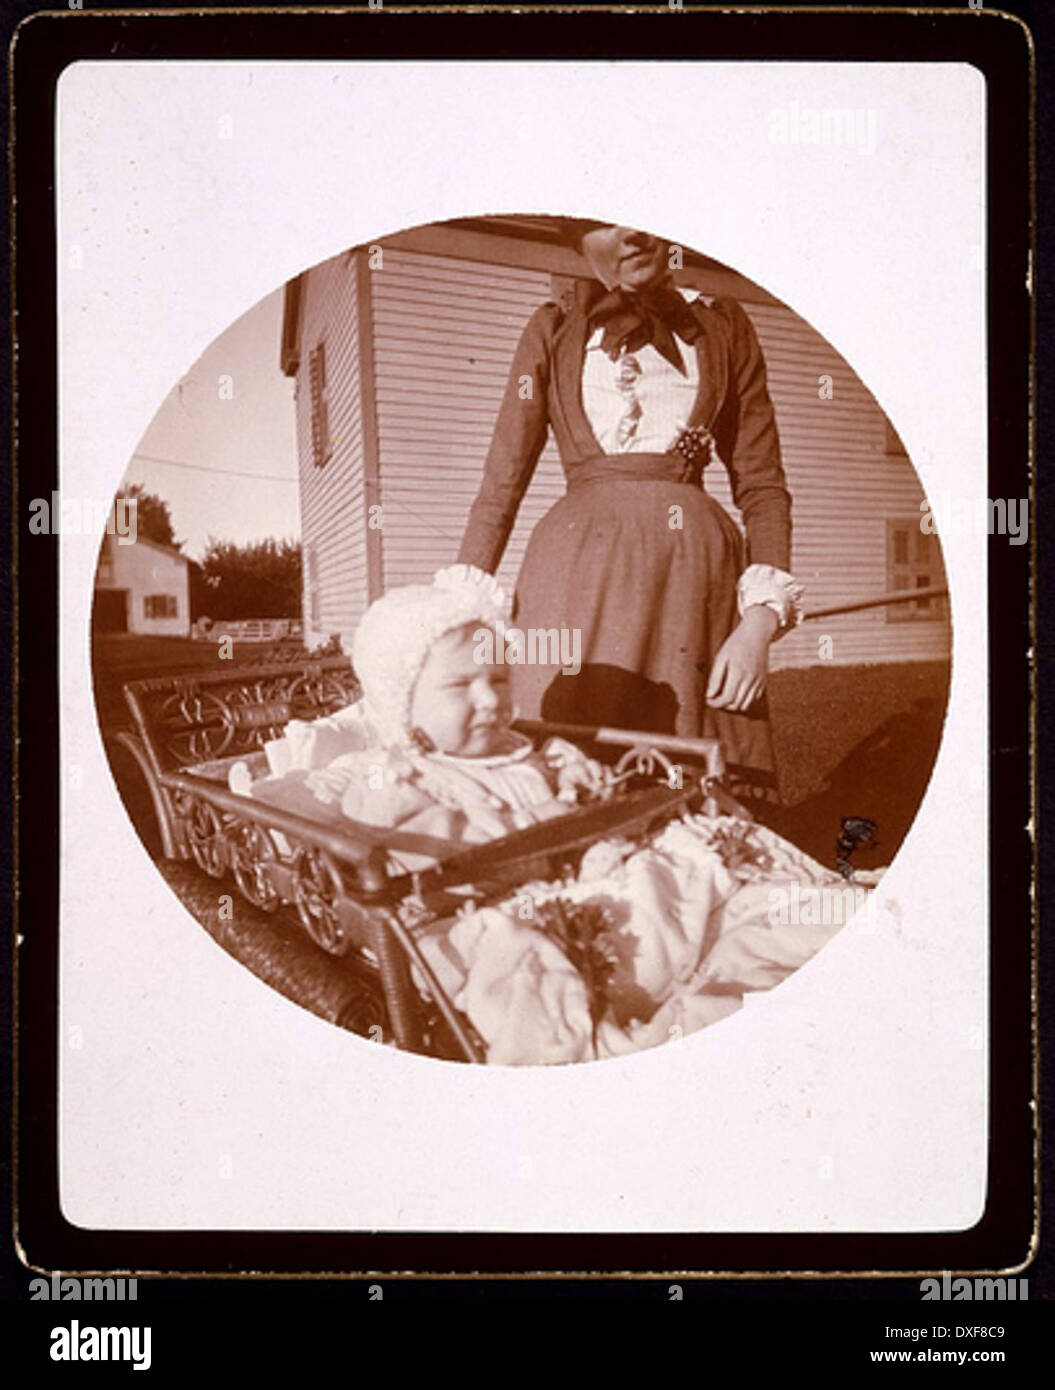 Baby in carriage, woman standing behind Stock Photo